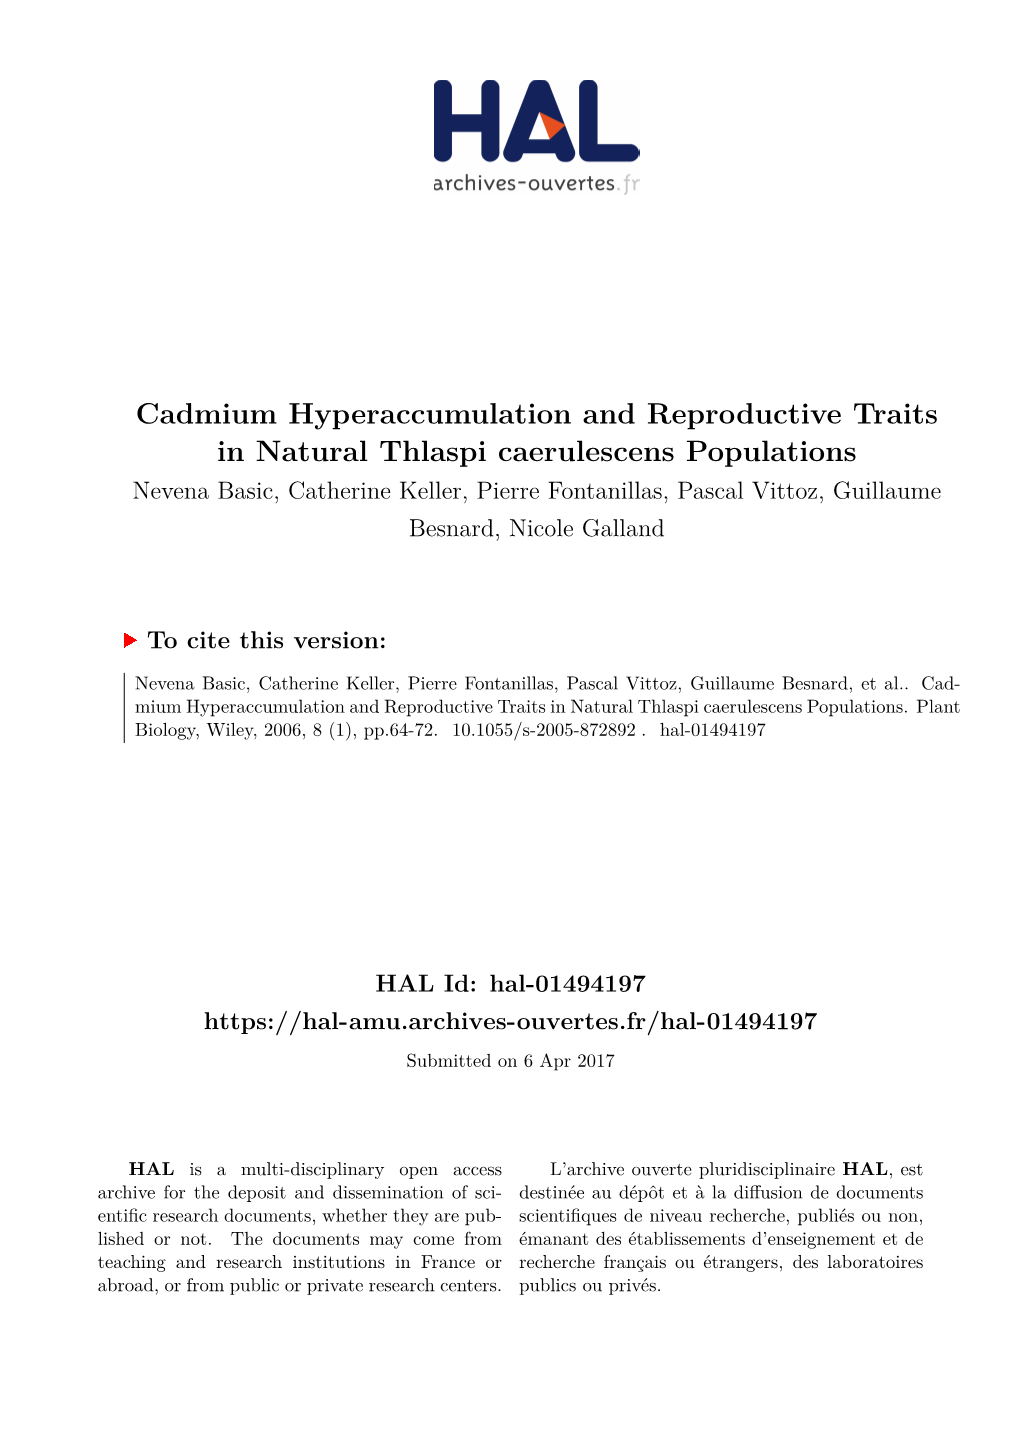 Cadmium Hyperaccumulation and Reproductive Traits in Natural